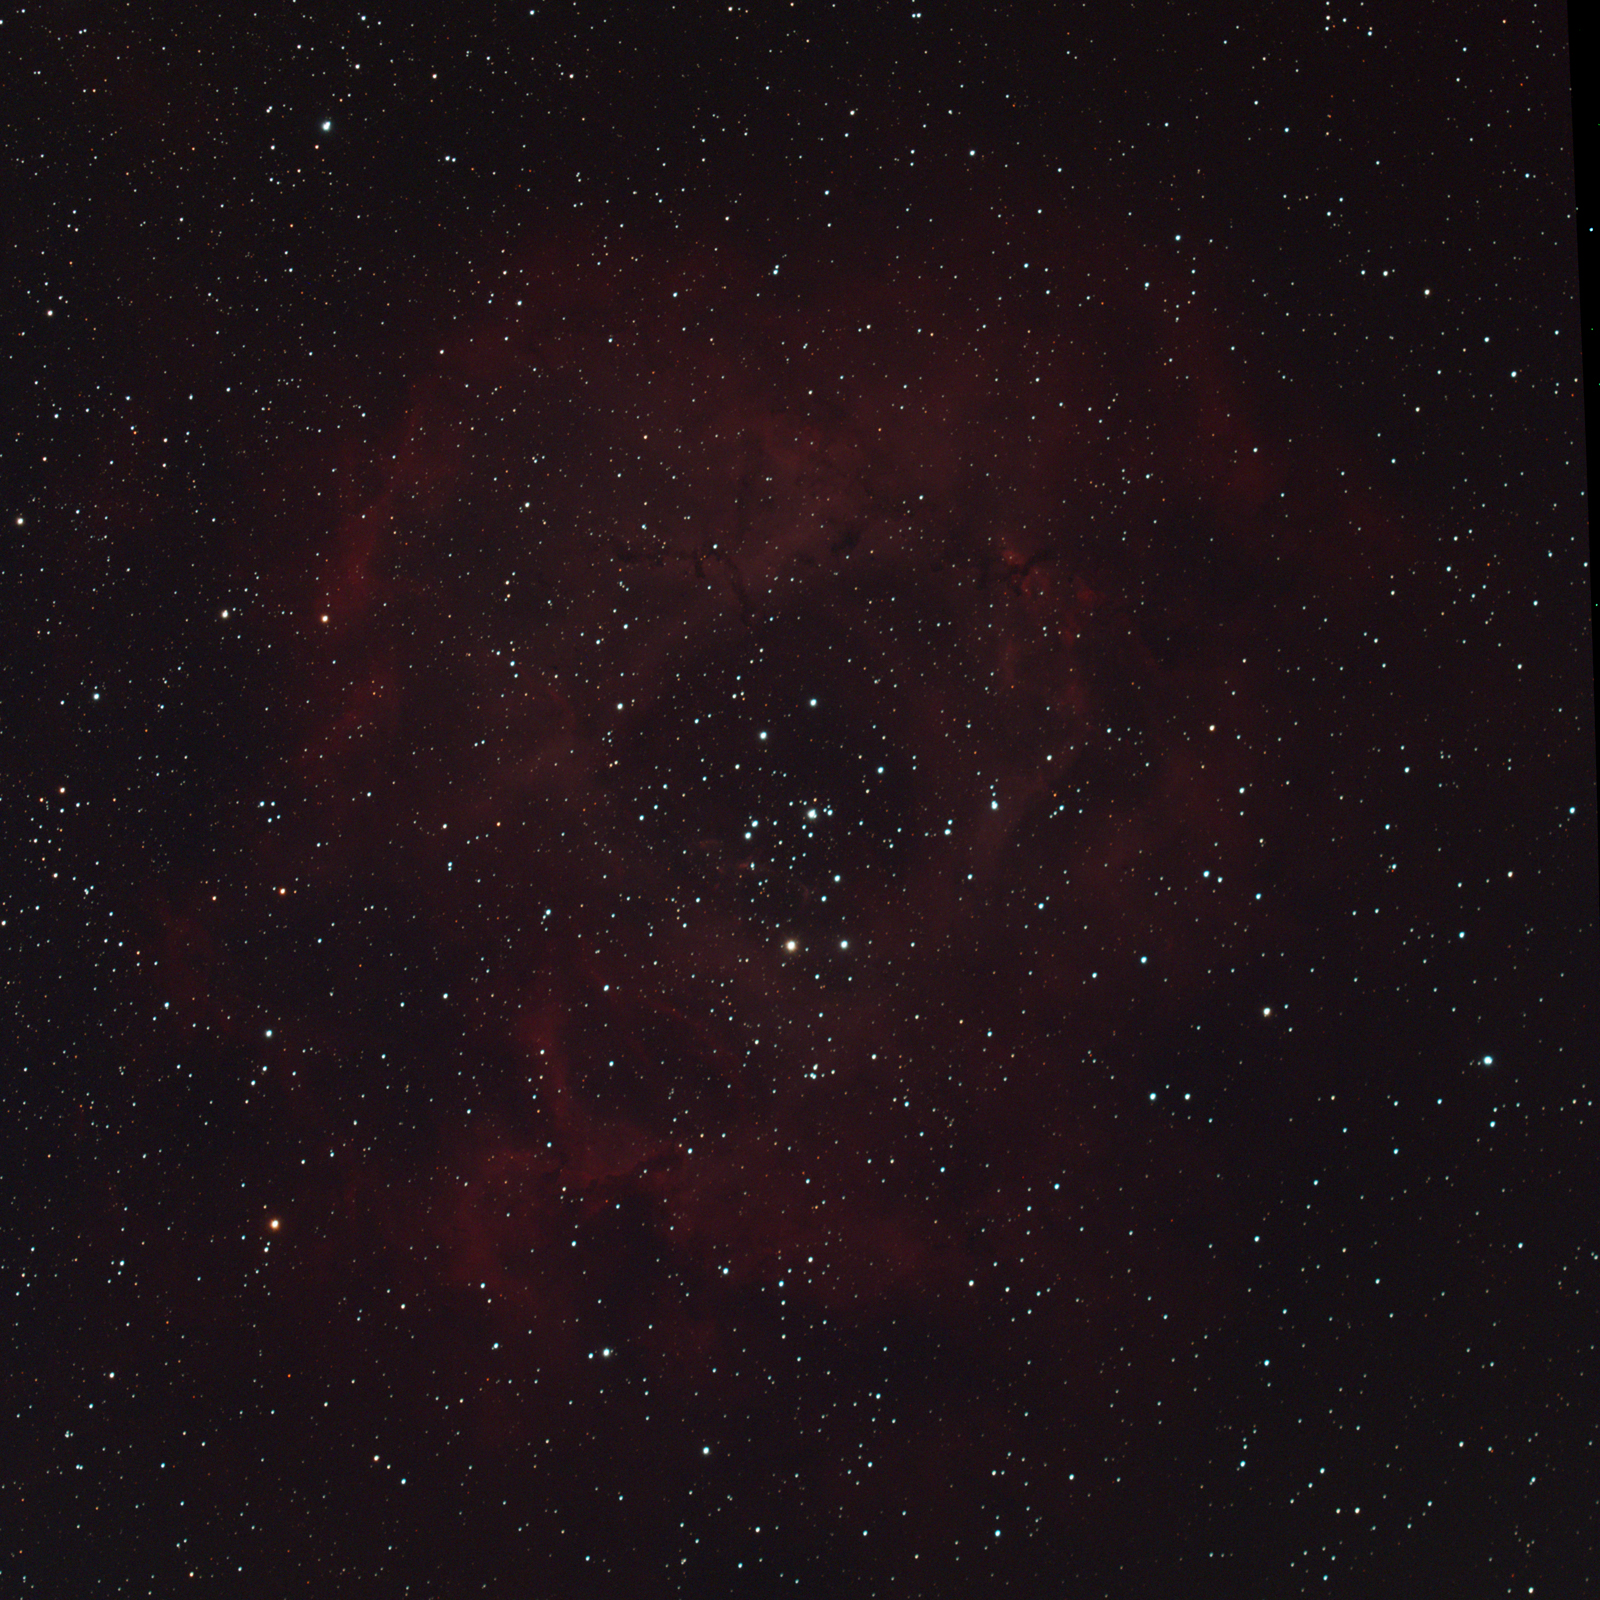 NGC2246 2600 g120 br10 36F 540S NoEdit 10212022m